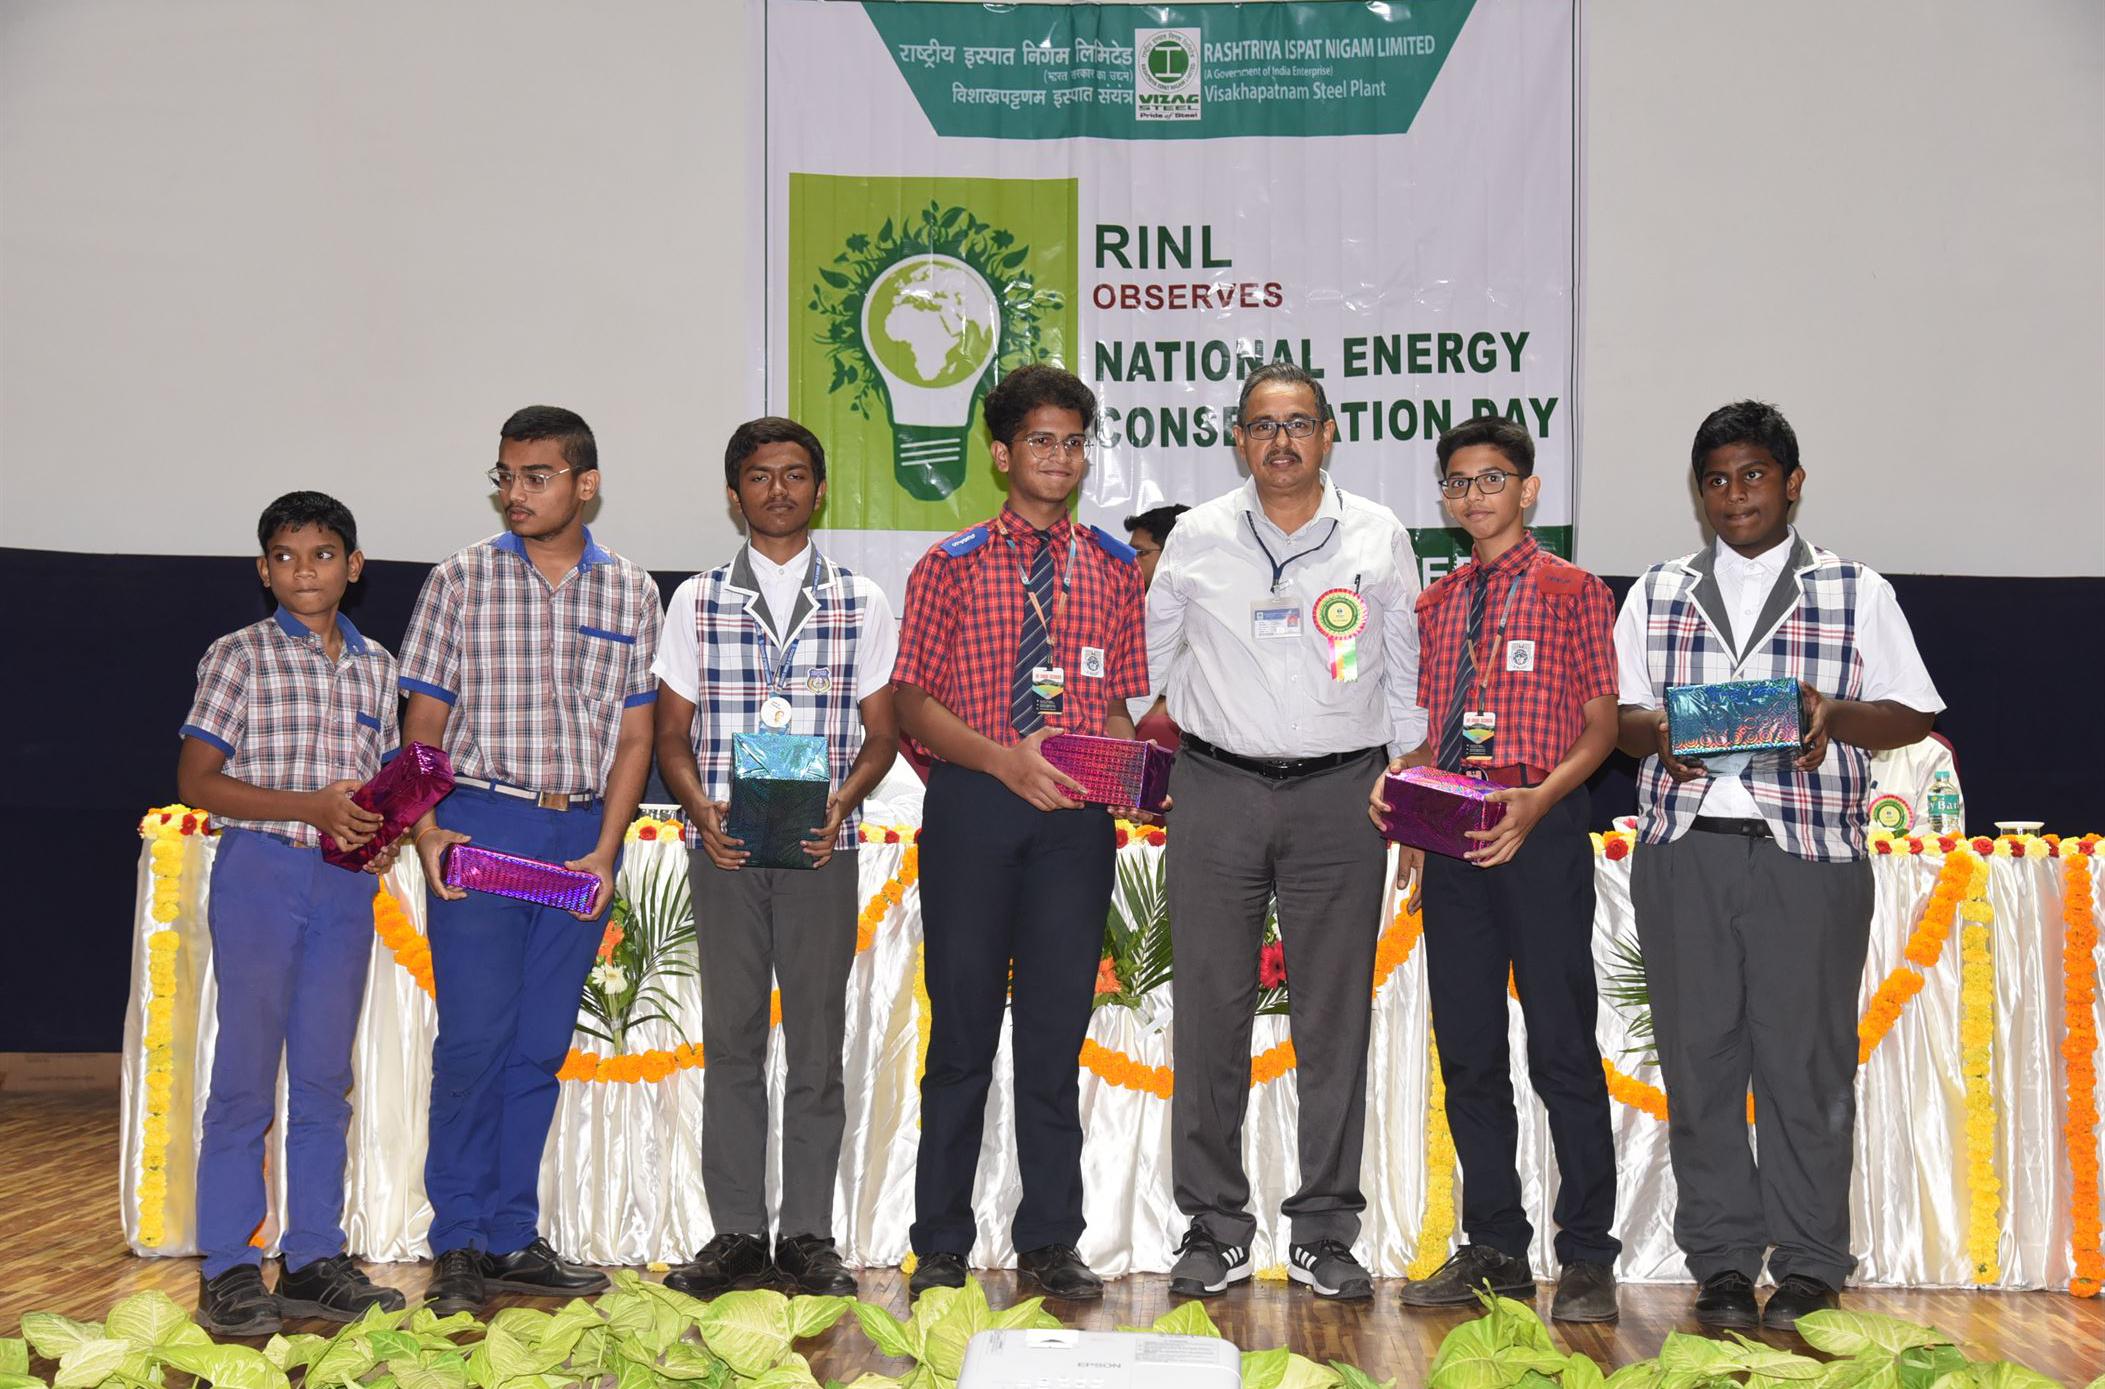 National Energy Conservation day celebrated at RINL